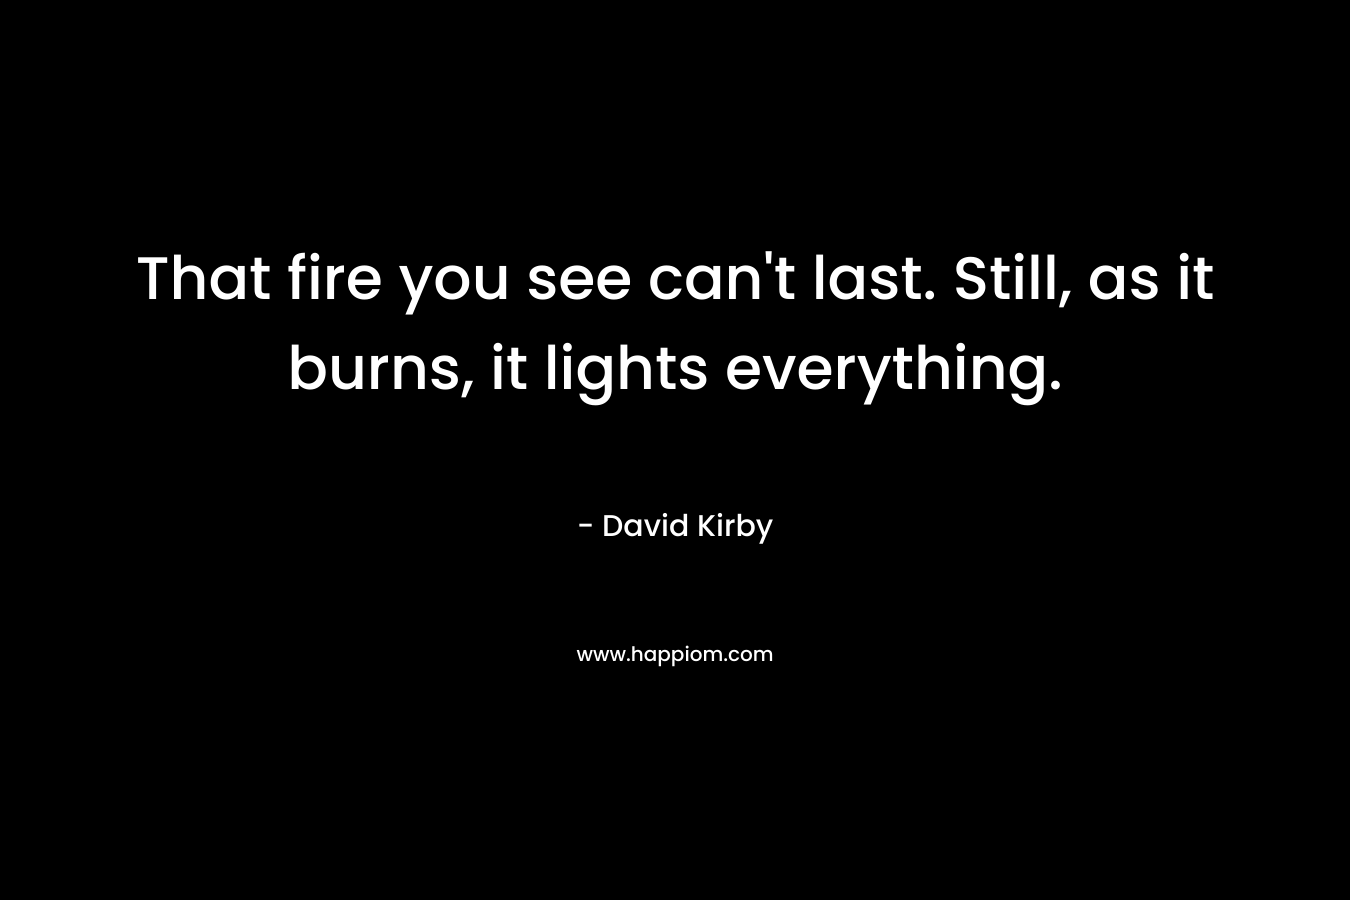 That fire you see can’t last. Still, as it burns, it lights everything. – David Kirby